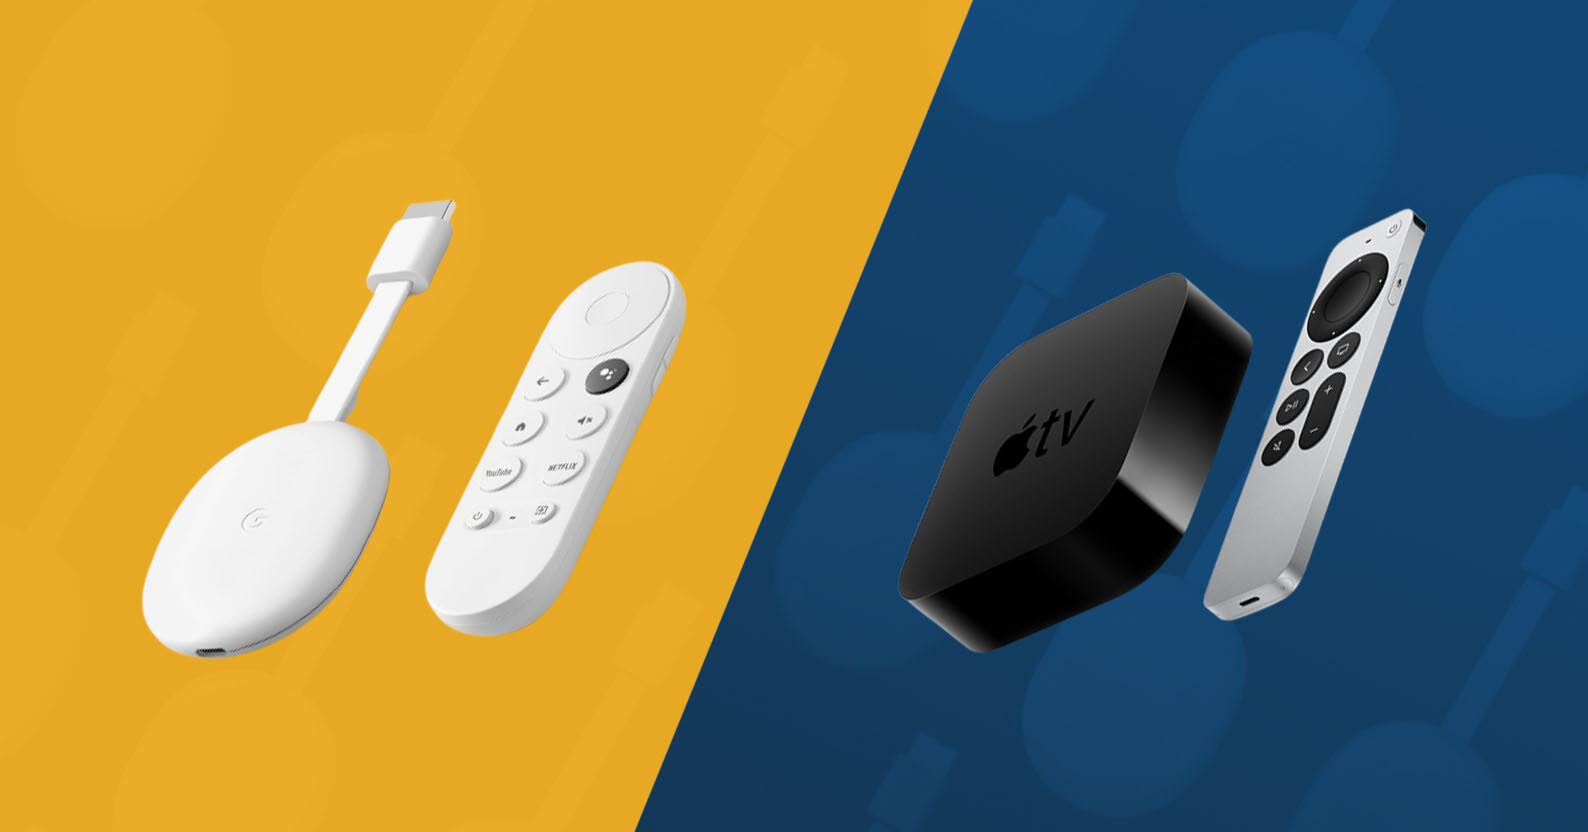 Android Box 4K Vs. Google Chromecast: What Are the Differences?